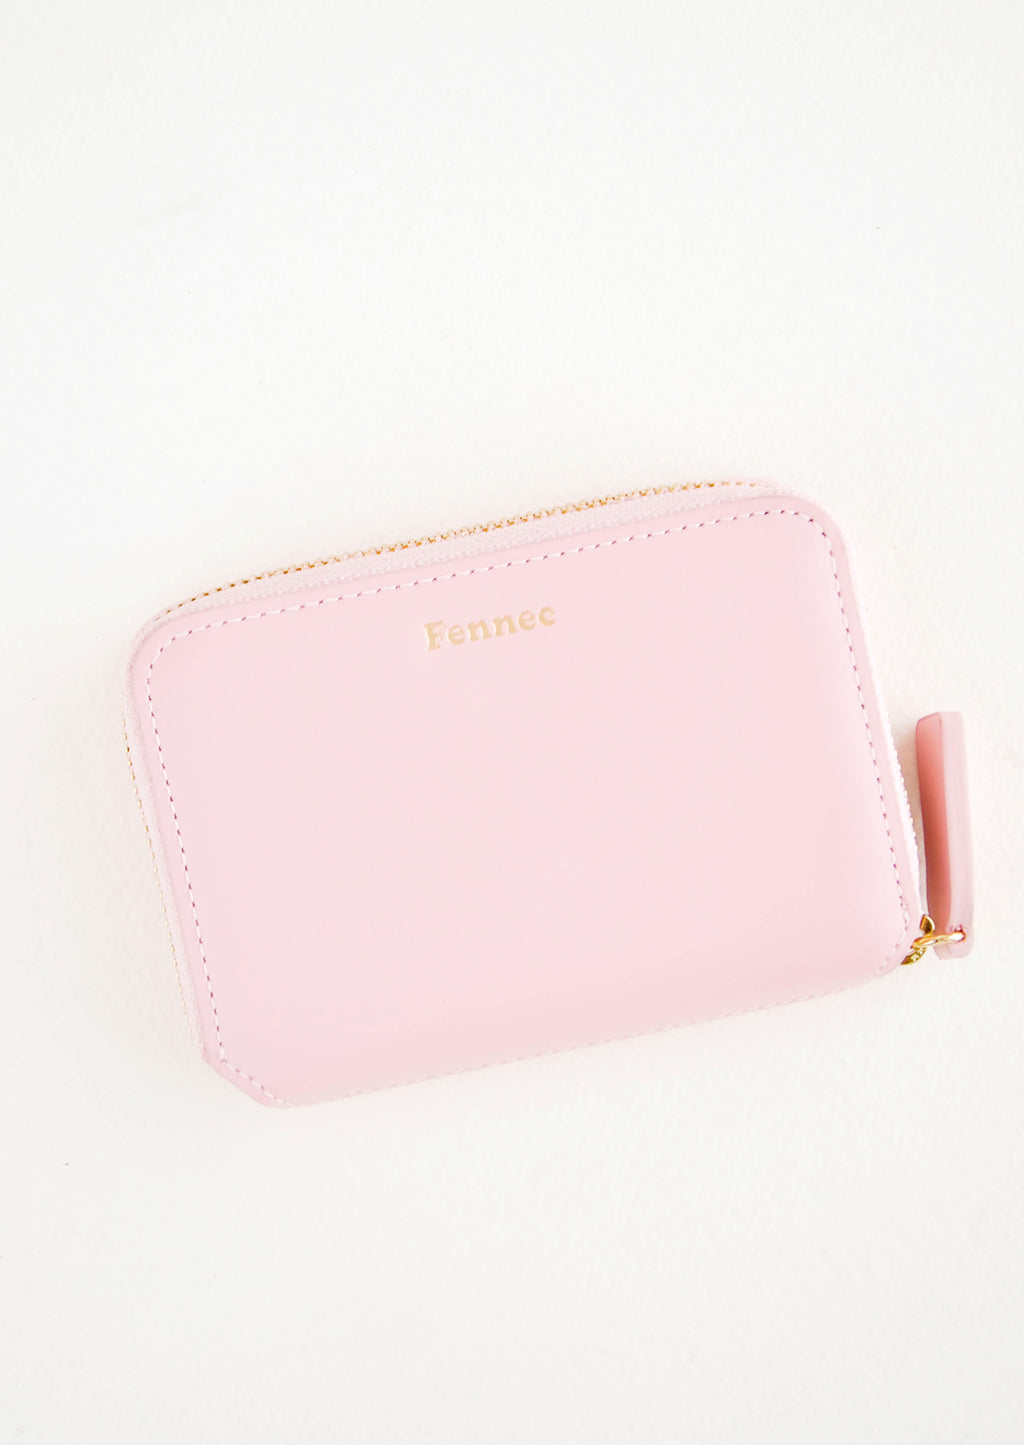 Pale Pink: Pale pink leather zip wallet with brand name Fennec embossed in small gold letters at top center of wallet face.